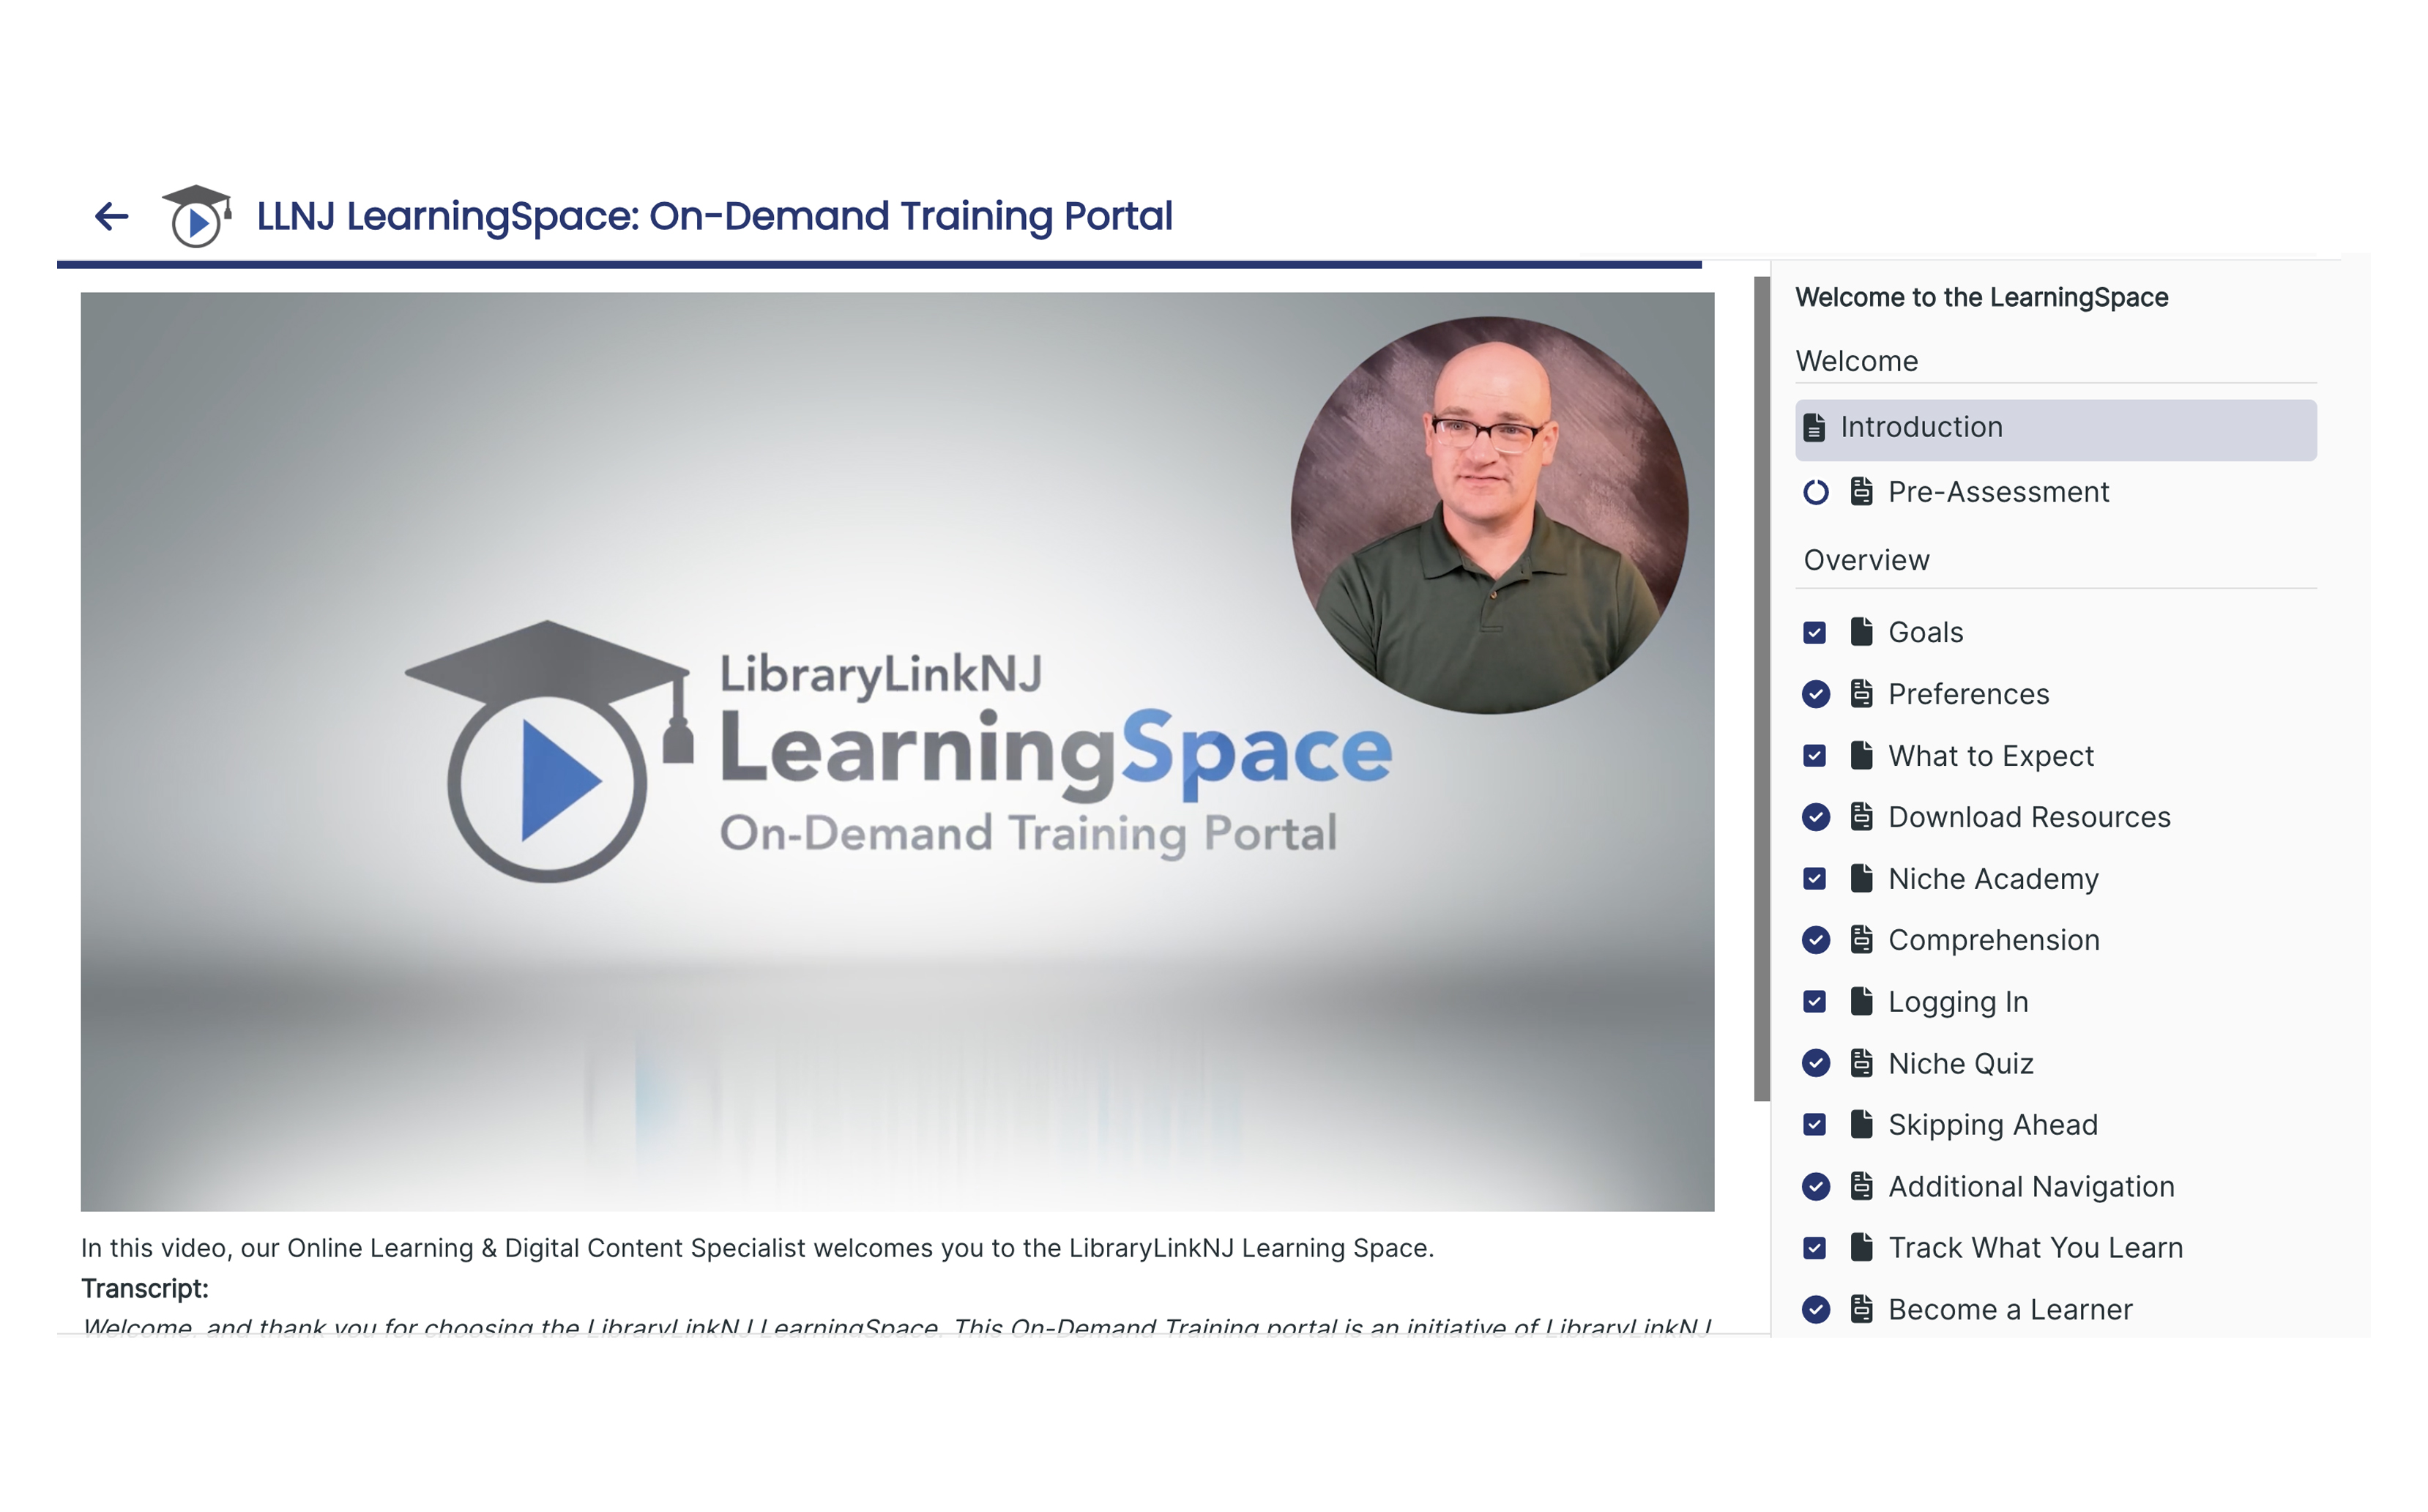 A screenshot from the Welcome to the LearningSpace module.